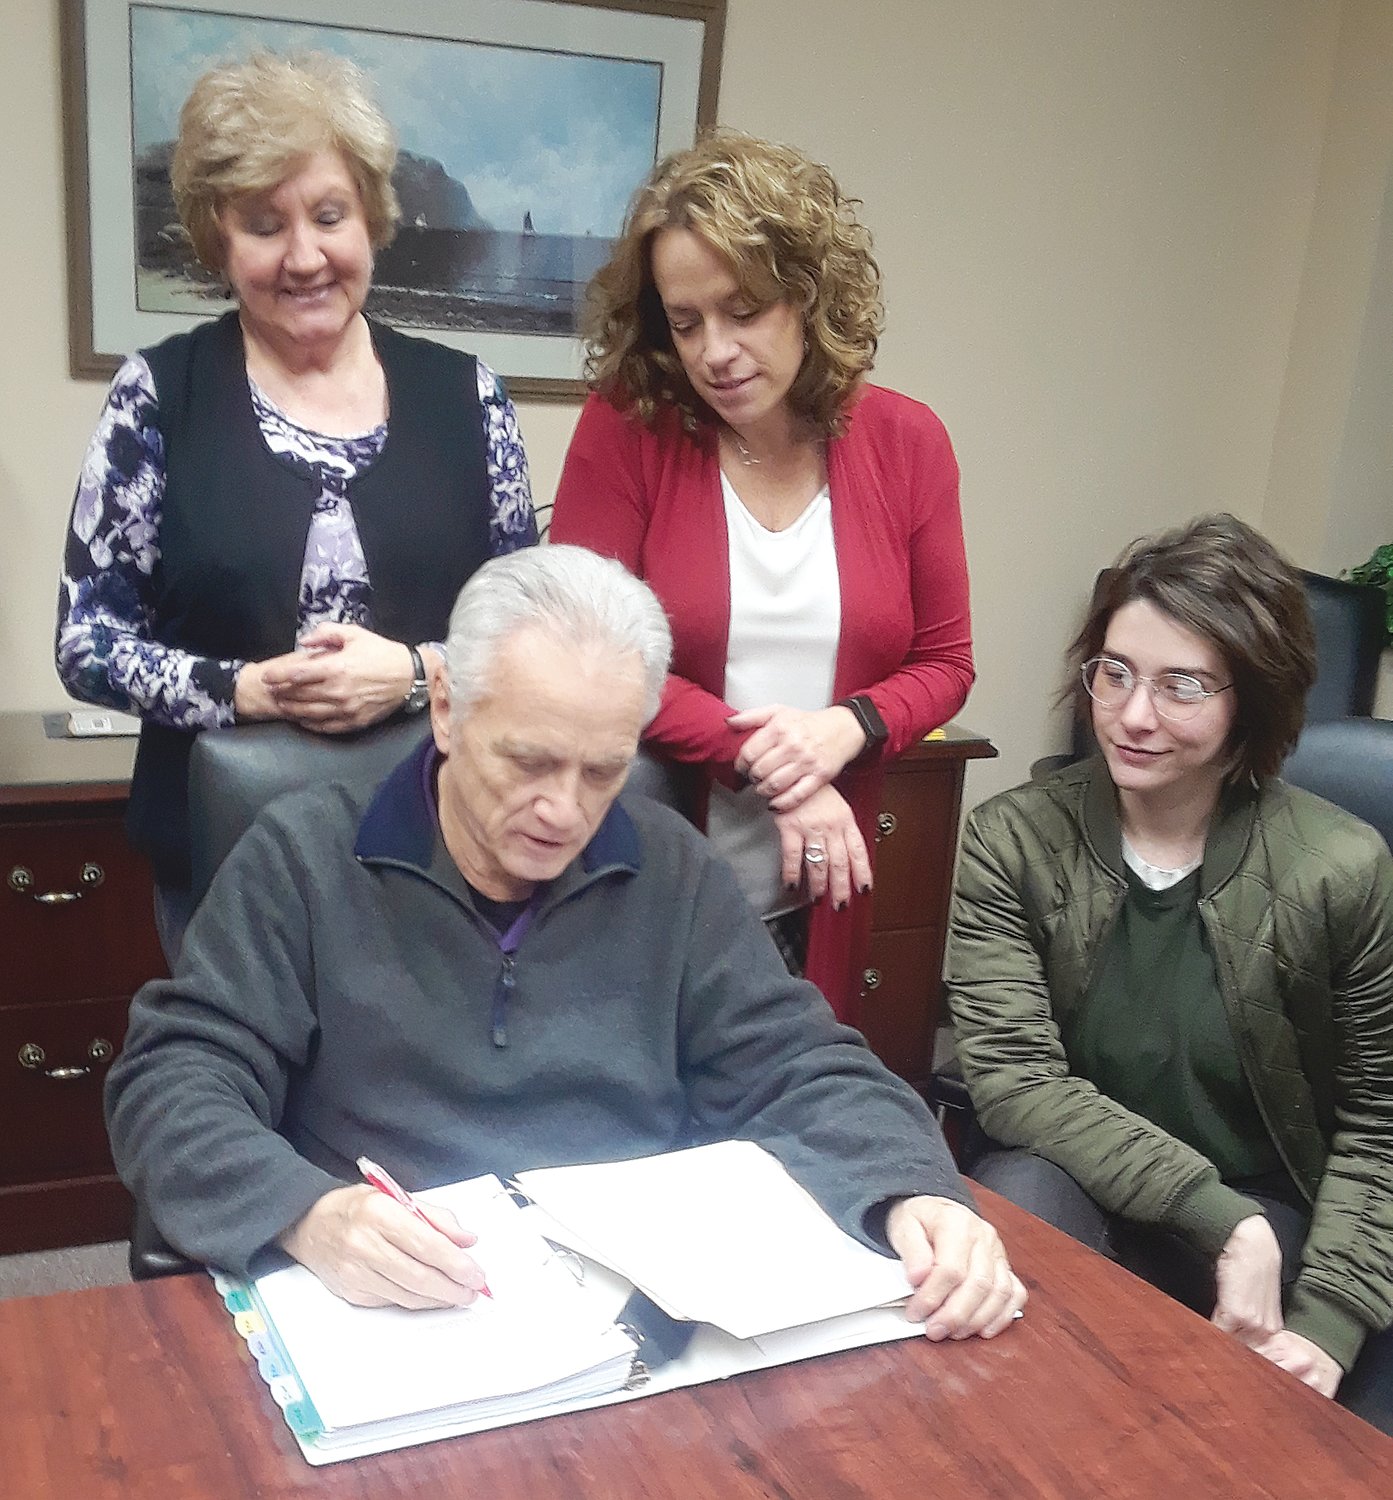 Board members, S David Long, Janet Jersey, Julia Perry and Shelbi Hoover review applications.